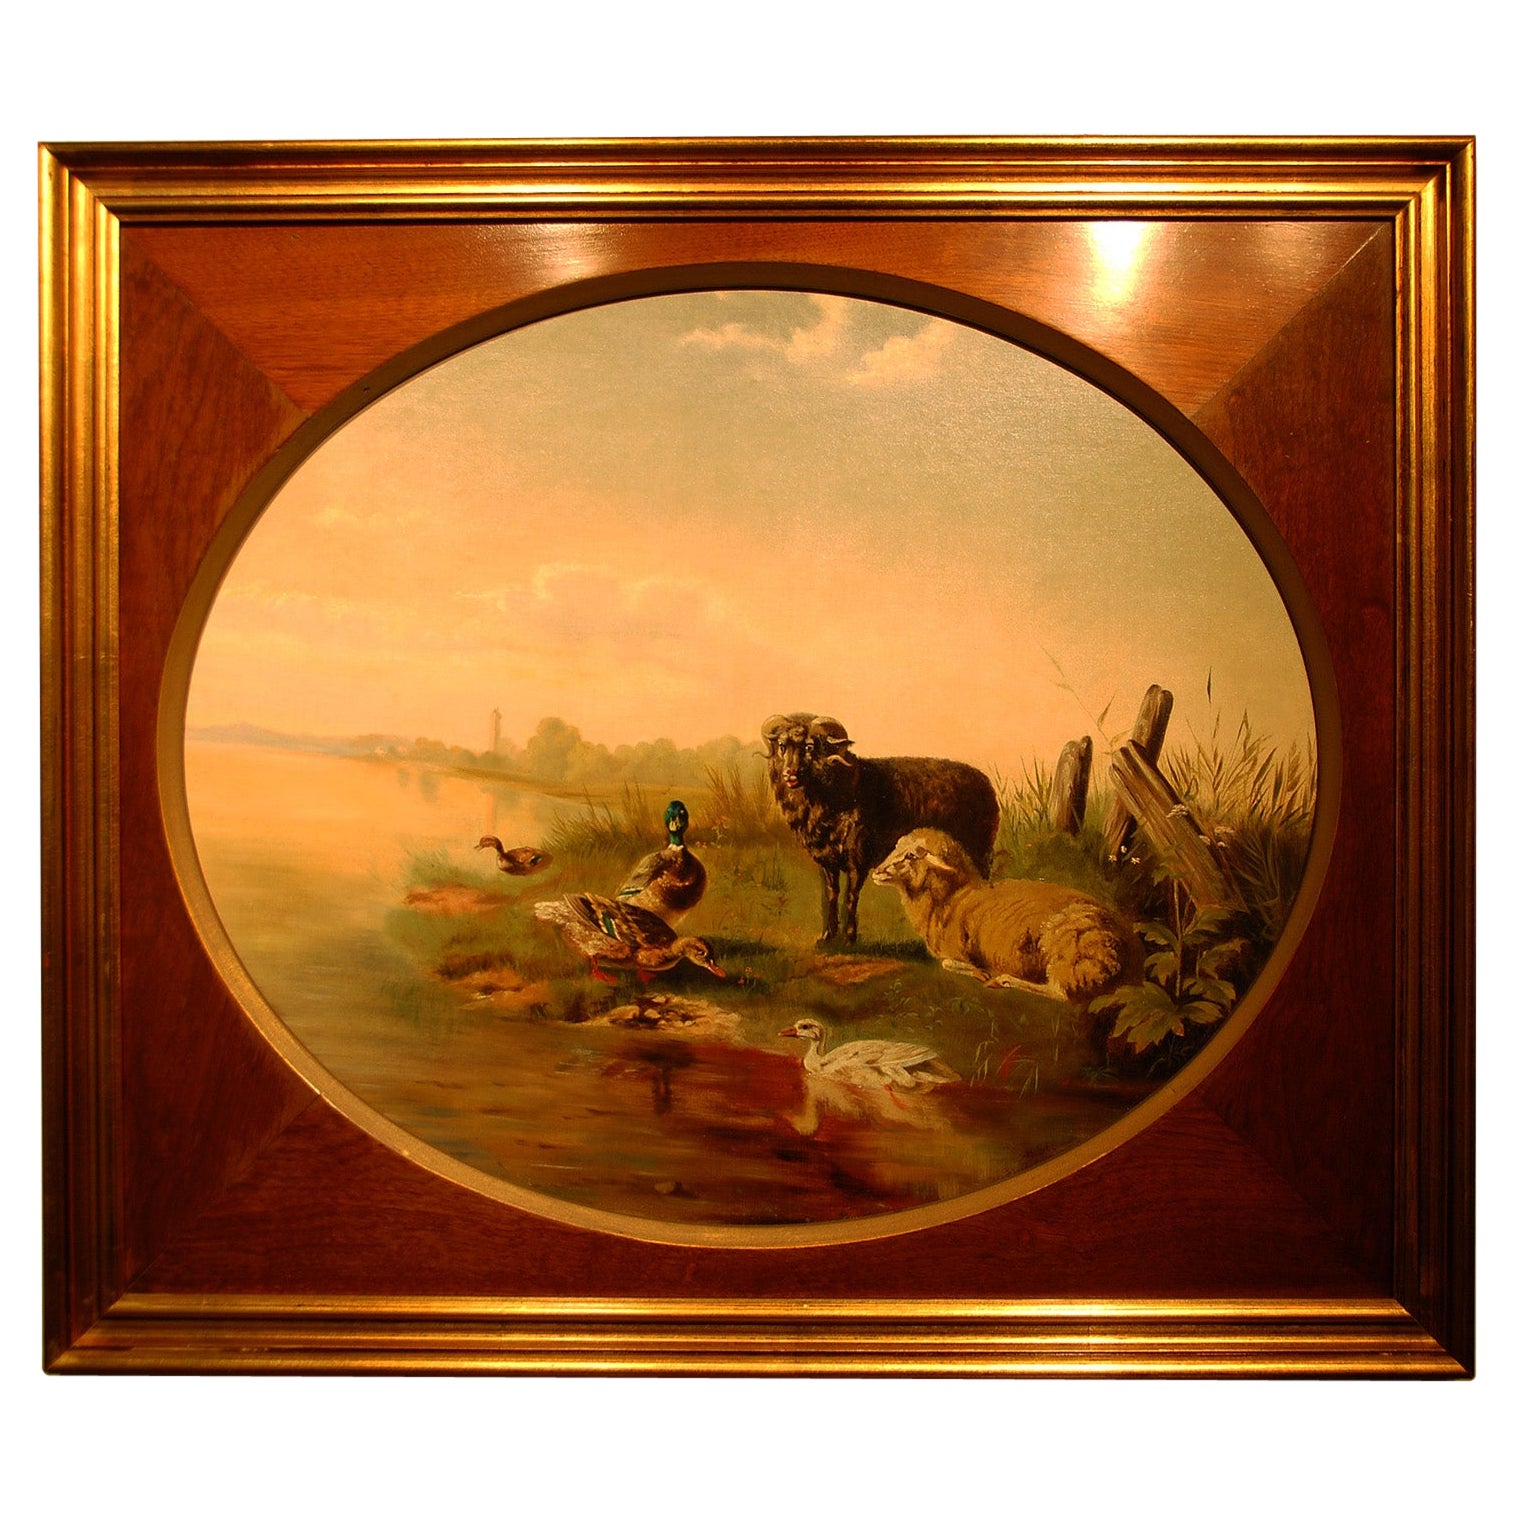 English or Dutch 19th Century Original Oil on Canvas "At the Water's Edge" For Sale